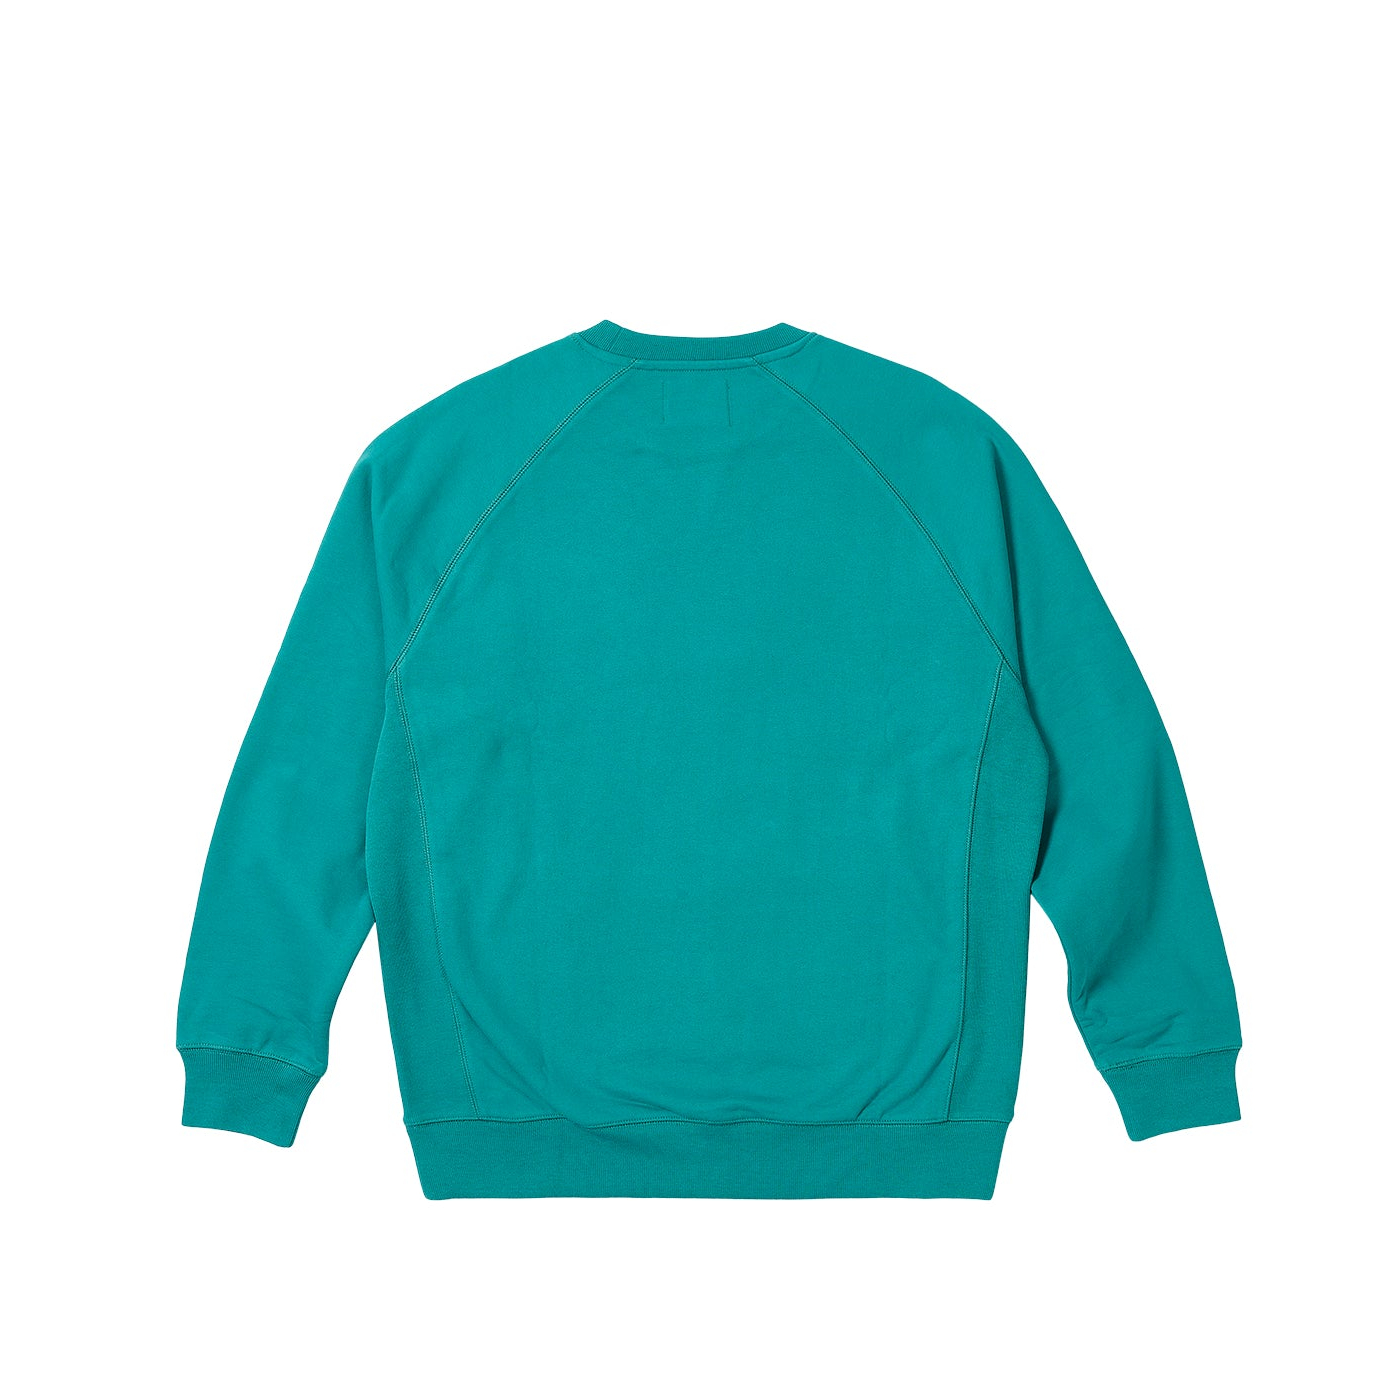 Thumbnail PALACE NEW BALANCE CREW TEAL one color